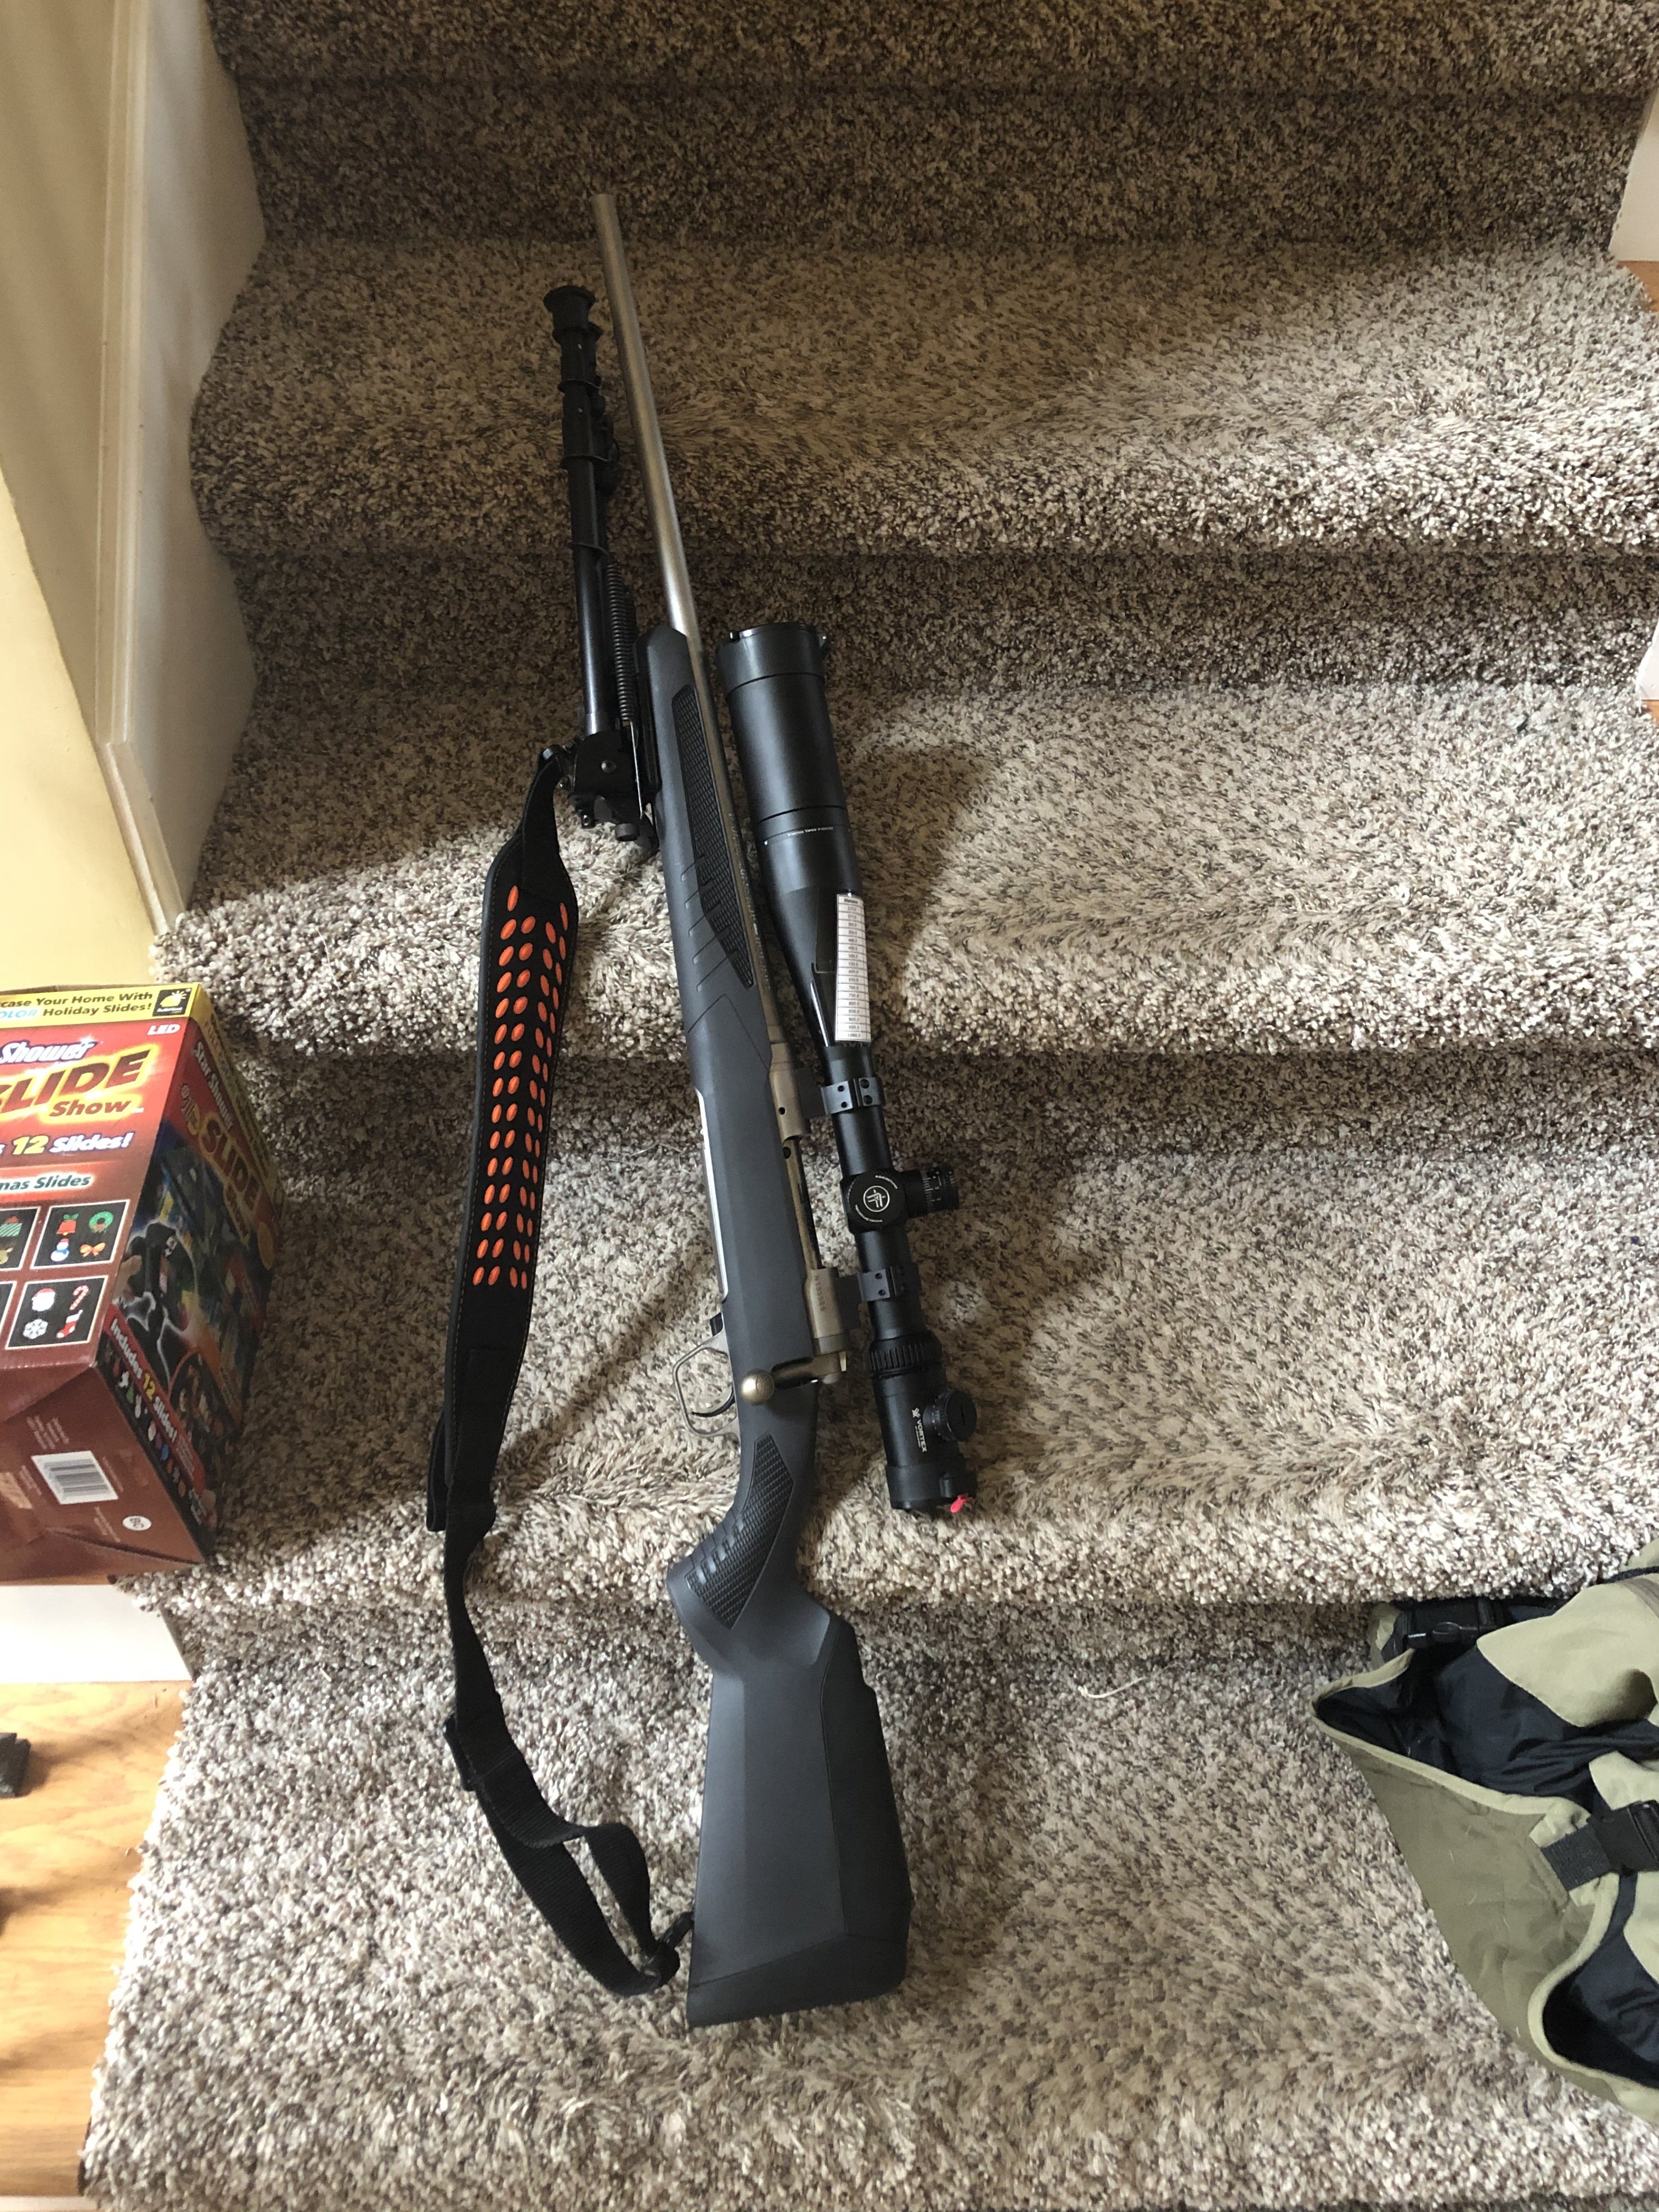 New Savage 110 Ultralite with Proof CF Barrels | Page 4 | Long Range ...